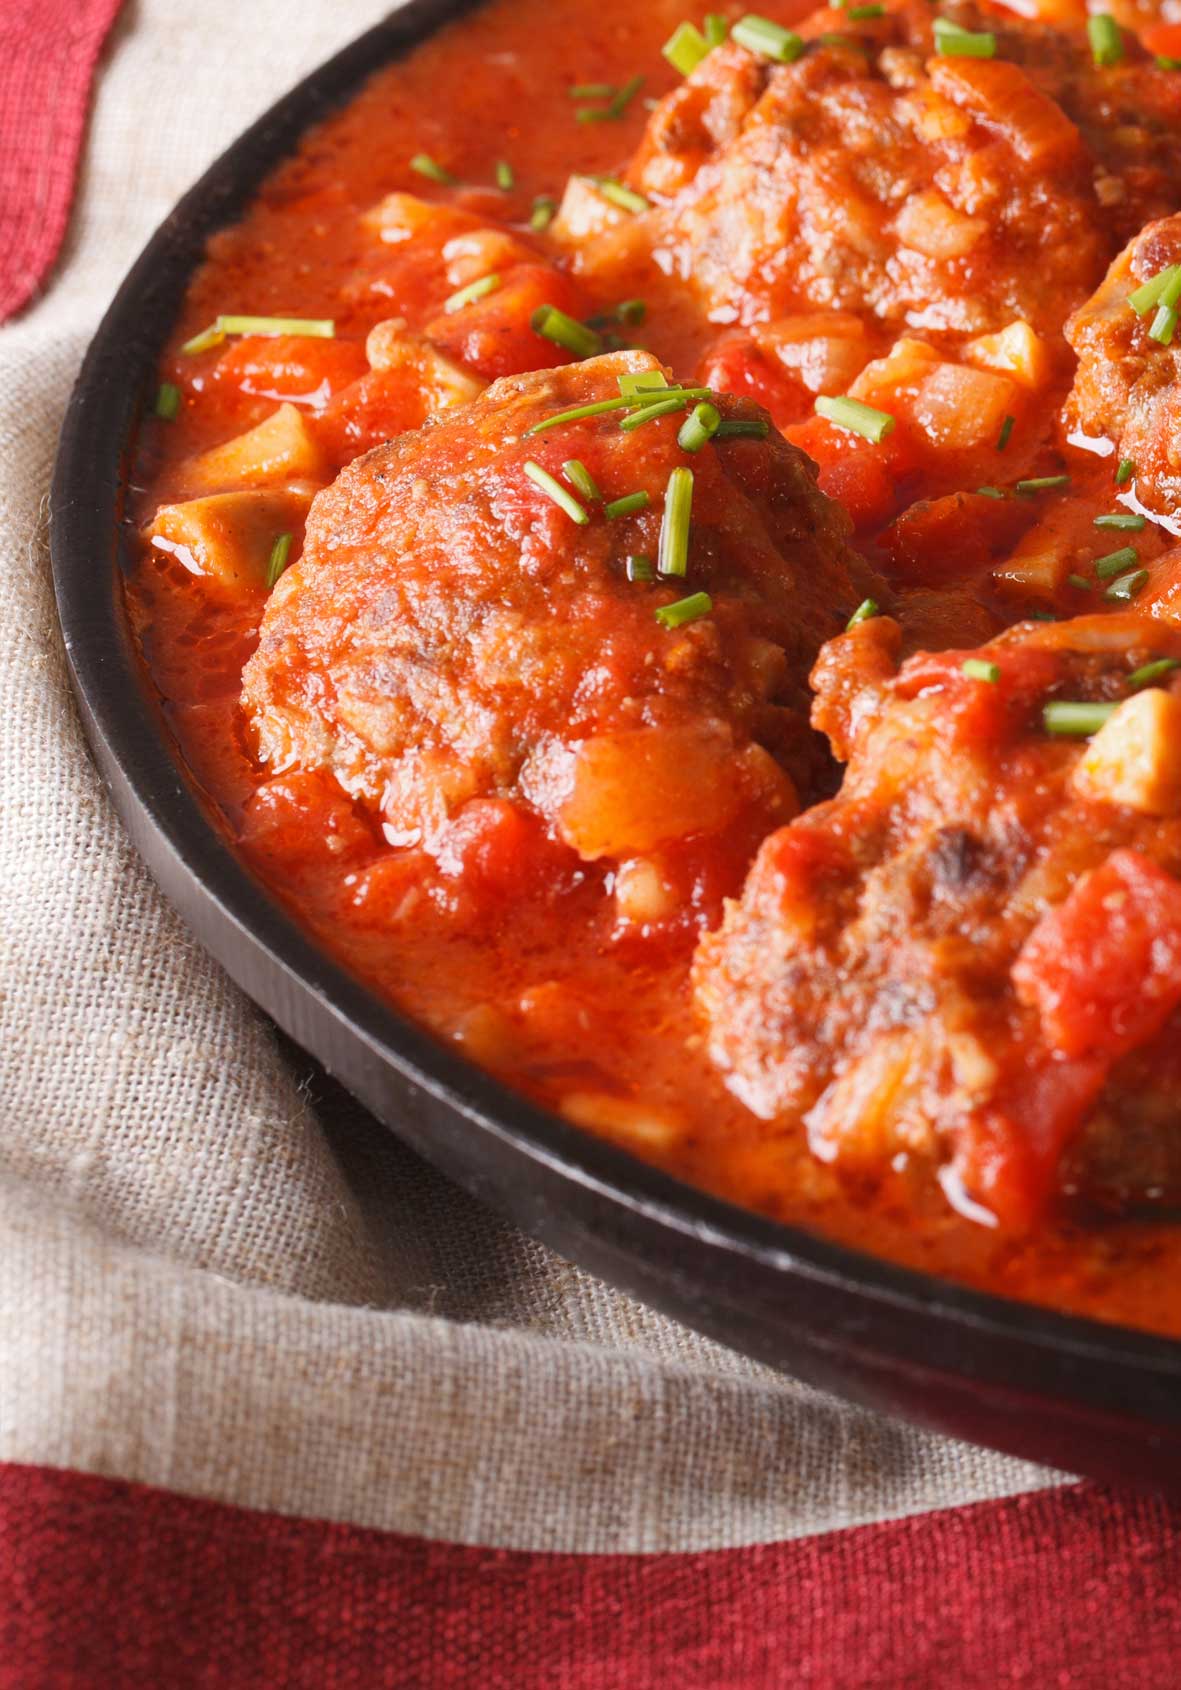 buffalo meatball recipes with cranberries and chilli